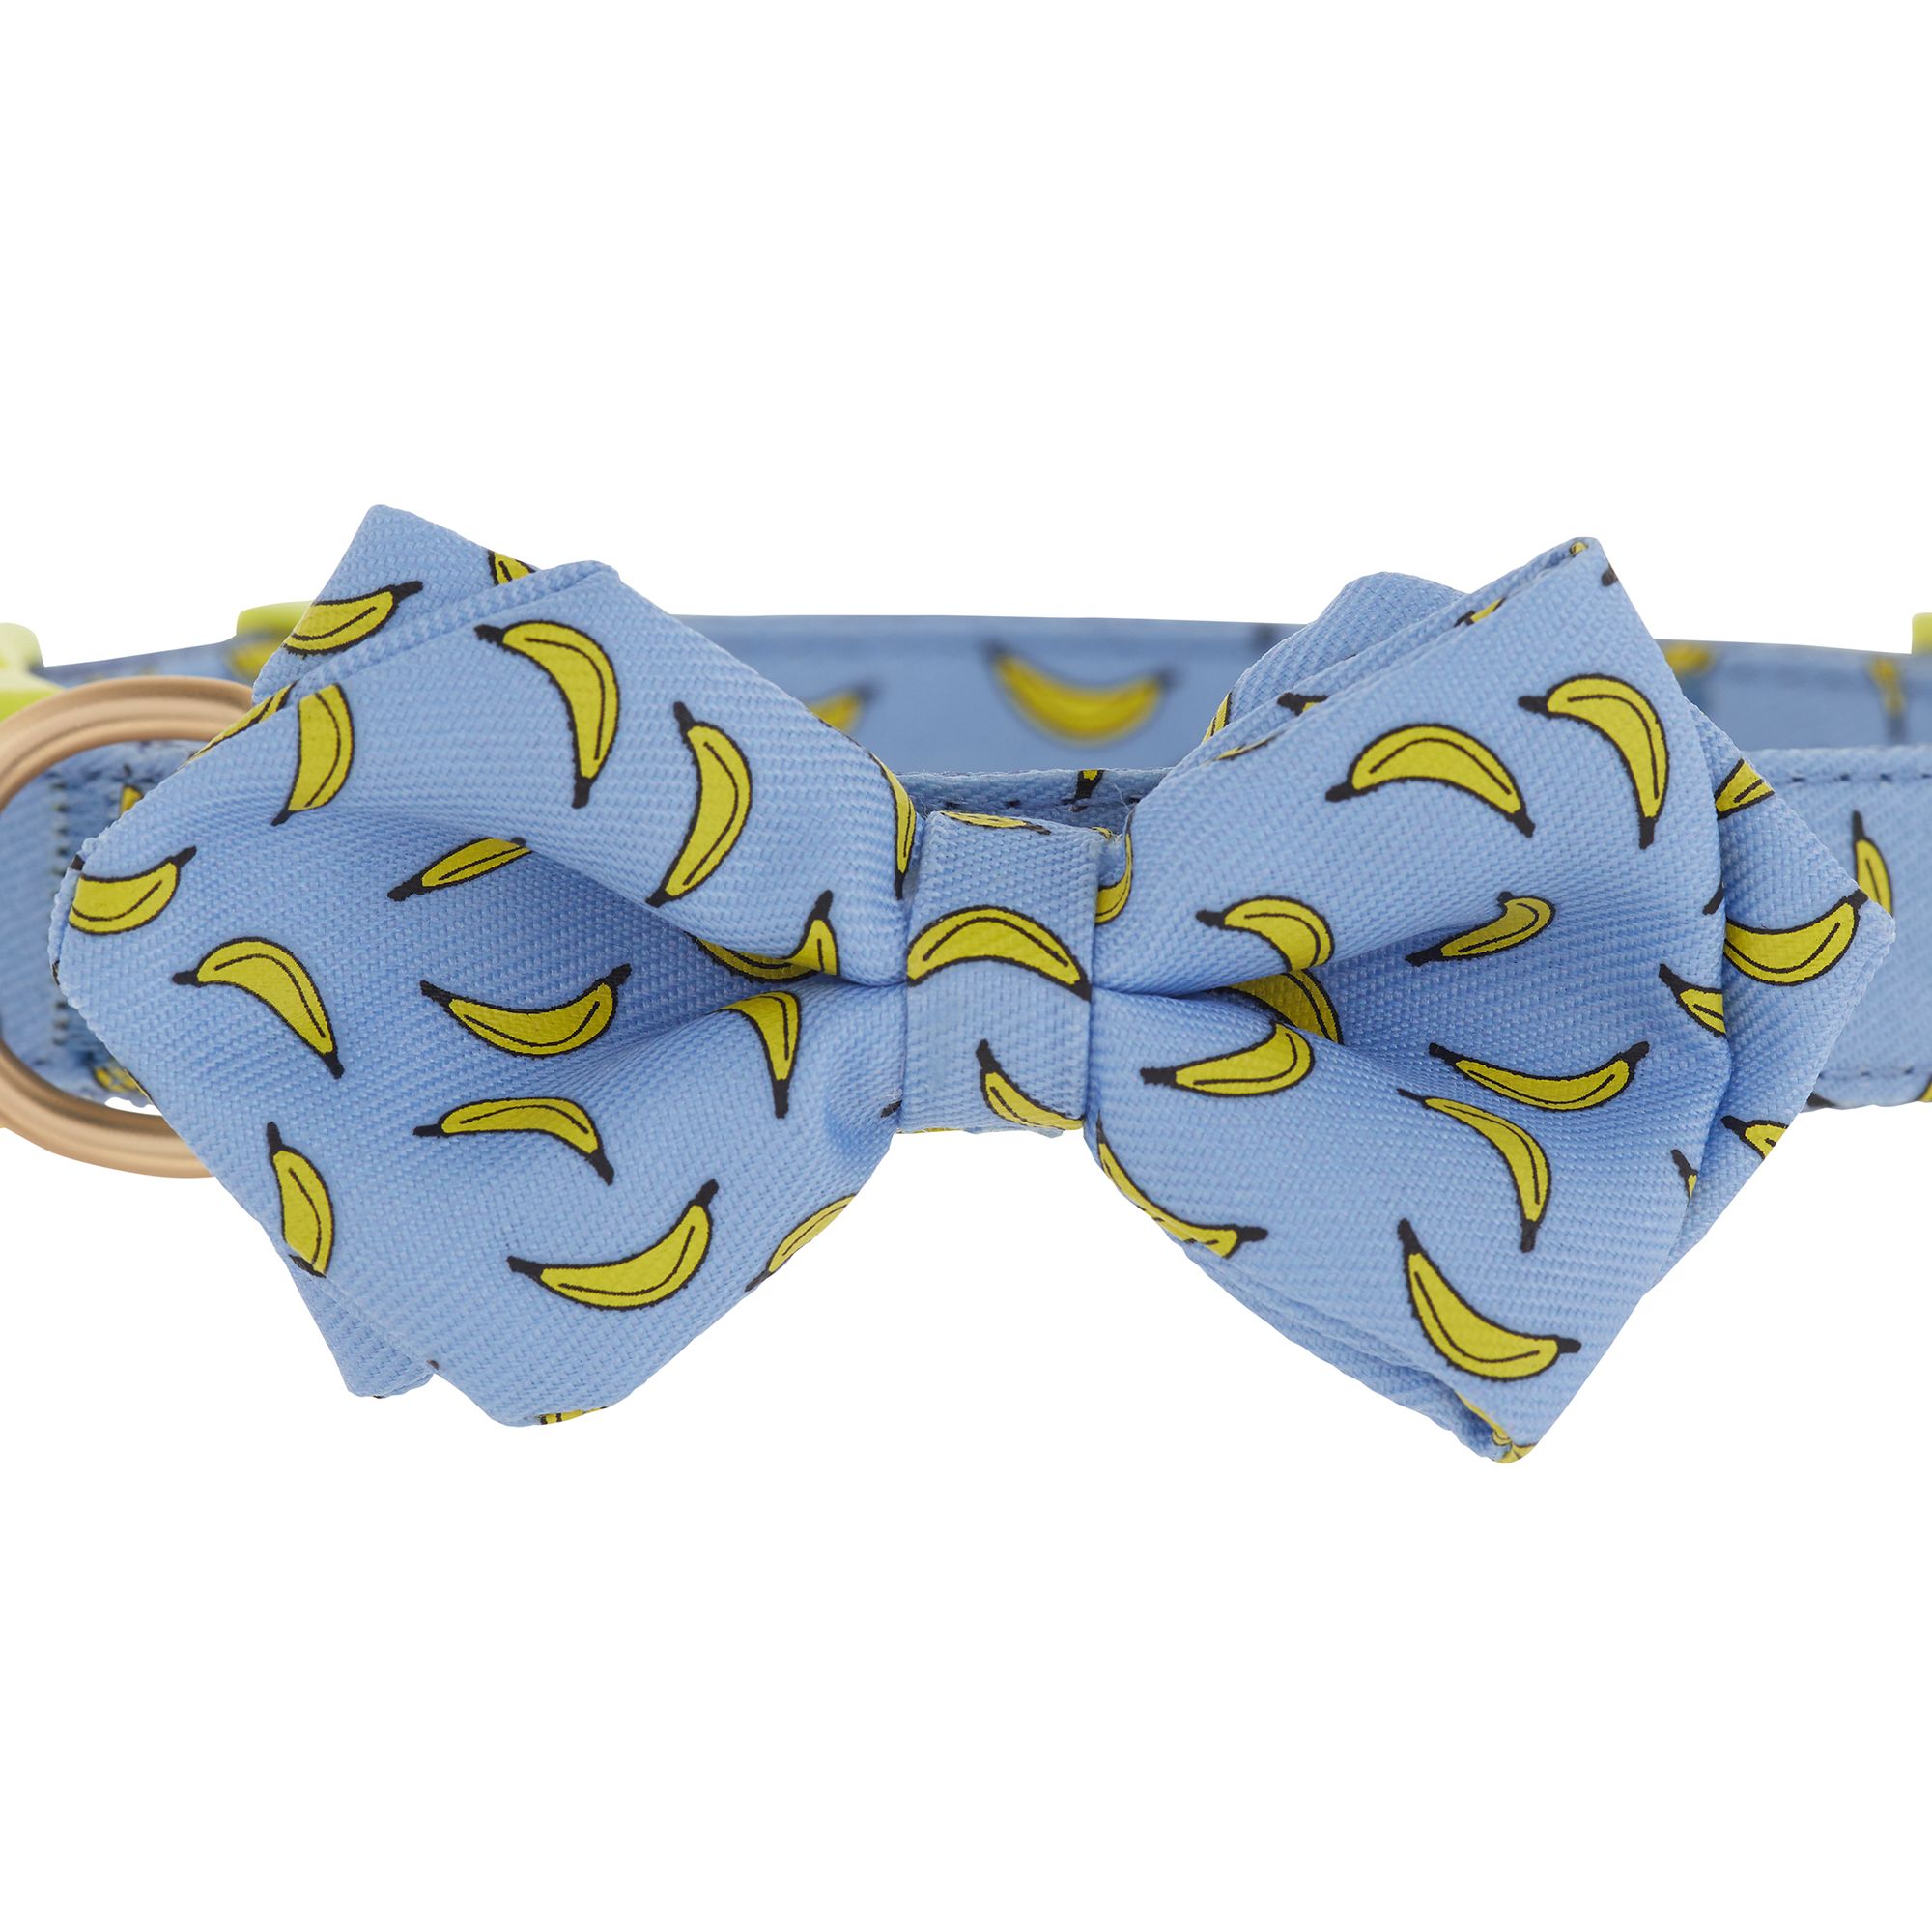 bow ties for dogs petco